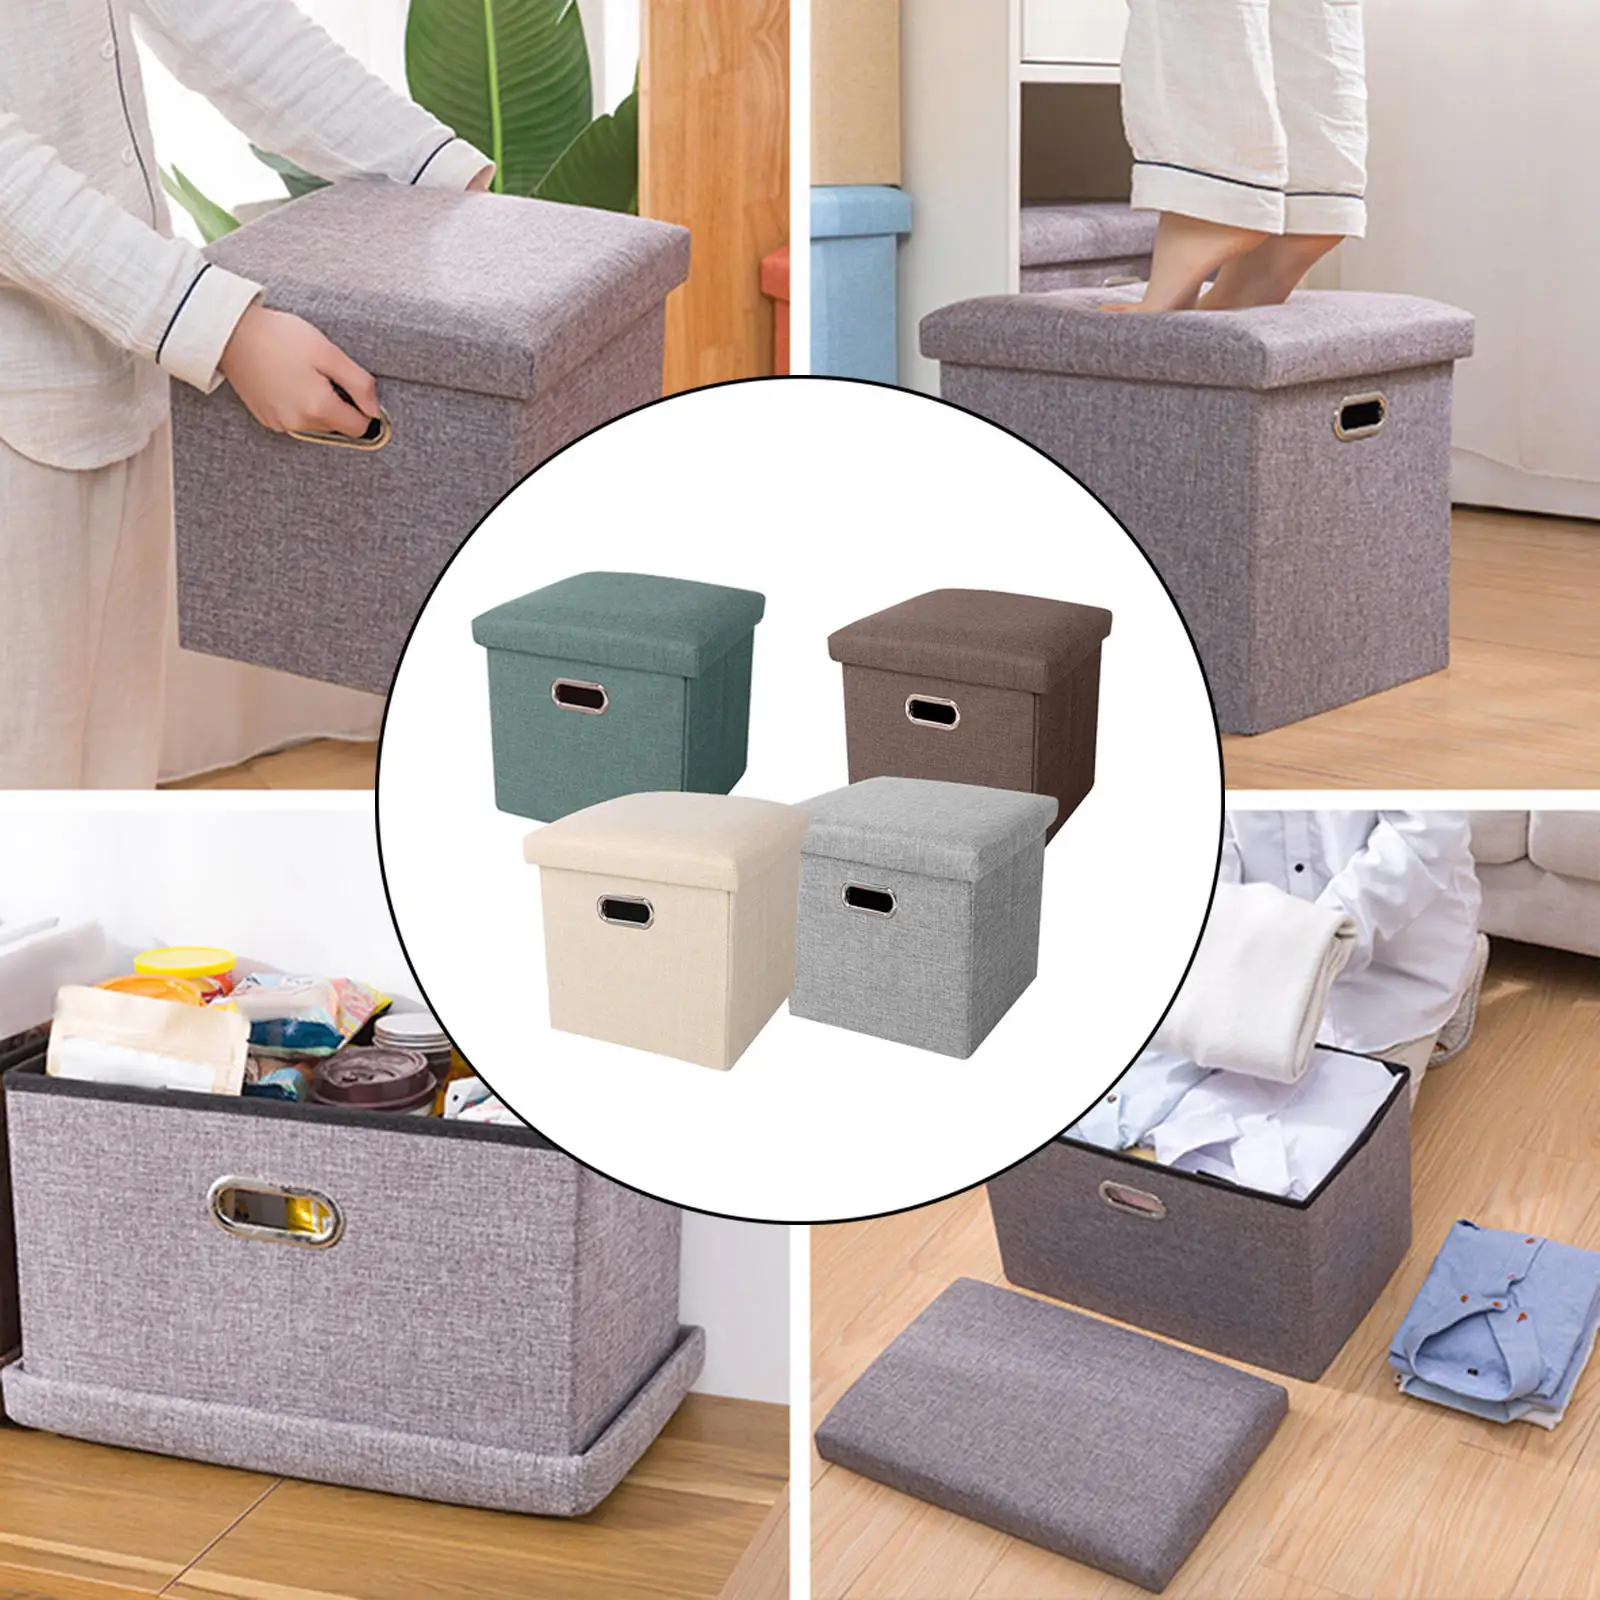 Foldable Storage Ottoman Foot Stool Bench Furniture Coffee Table for Bedroom Living Room Contemporary Kids Room